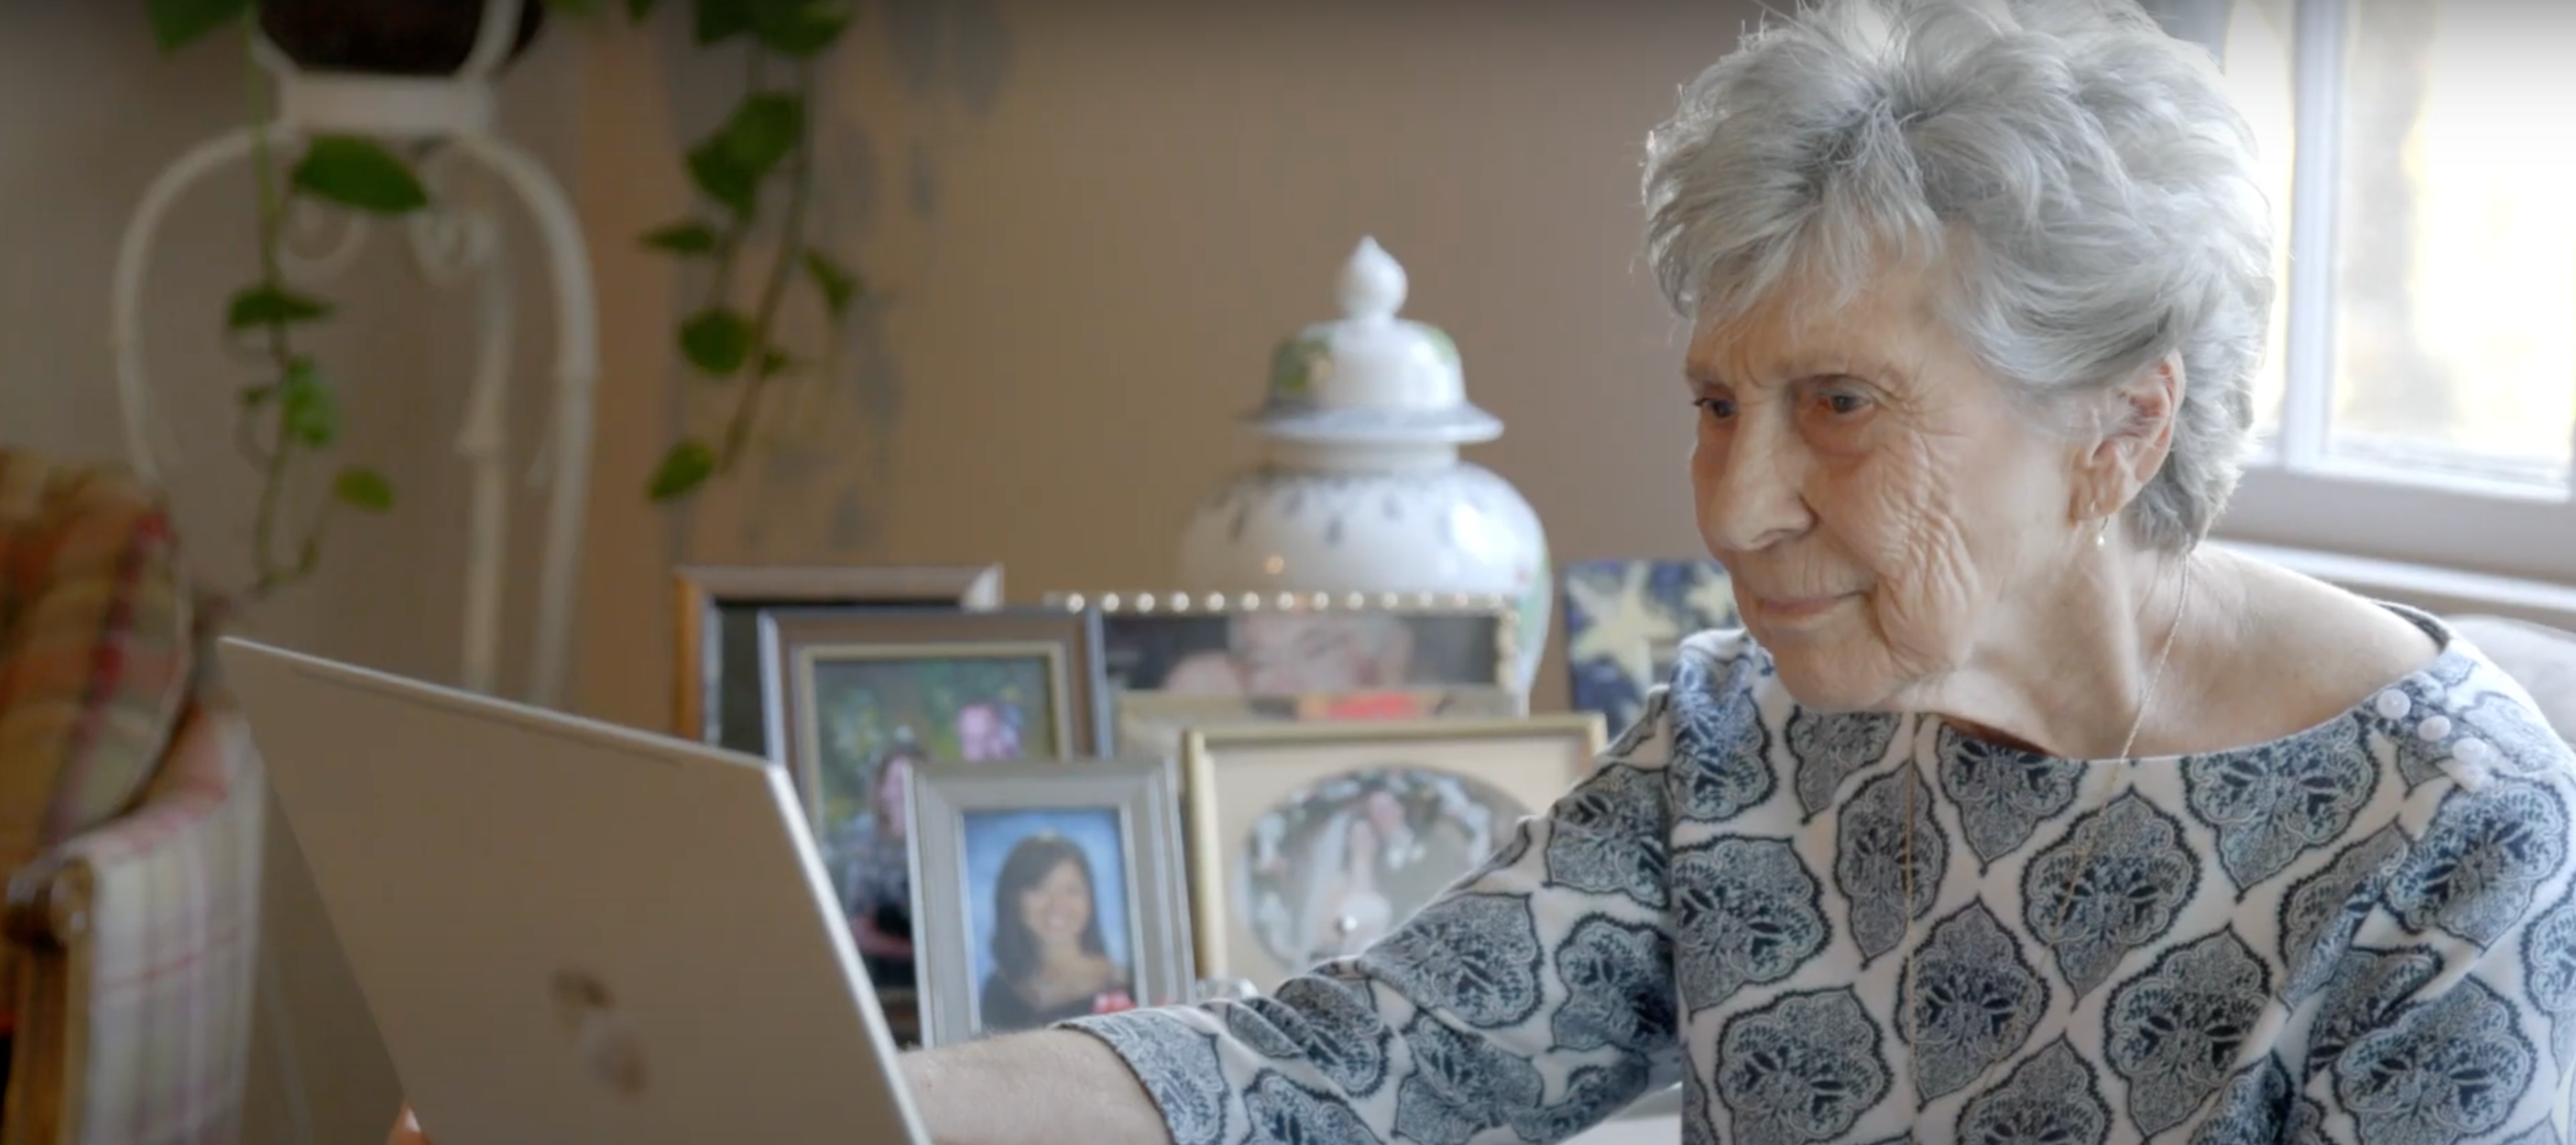 Phyllis Weisberg lost $20,000 to scammers. Protect yourself and learn how to report financial fraud if you suspect you’re a victim.